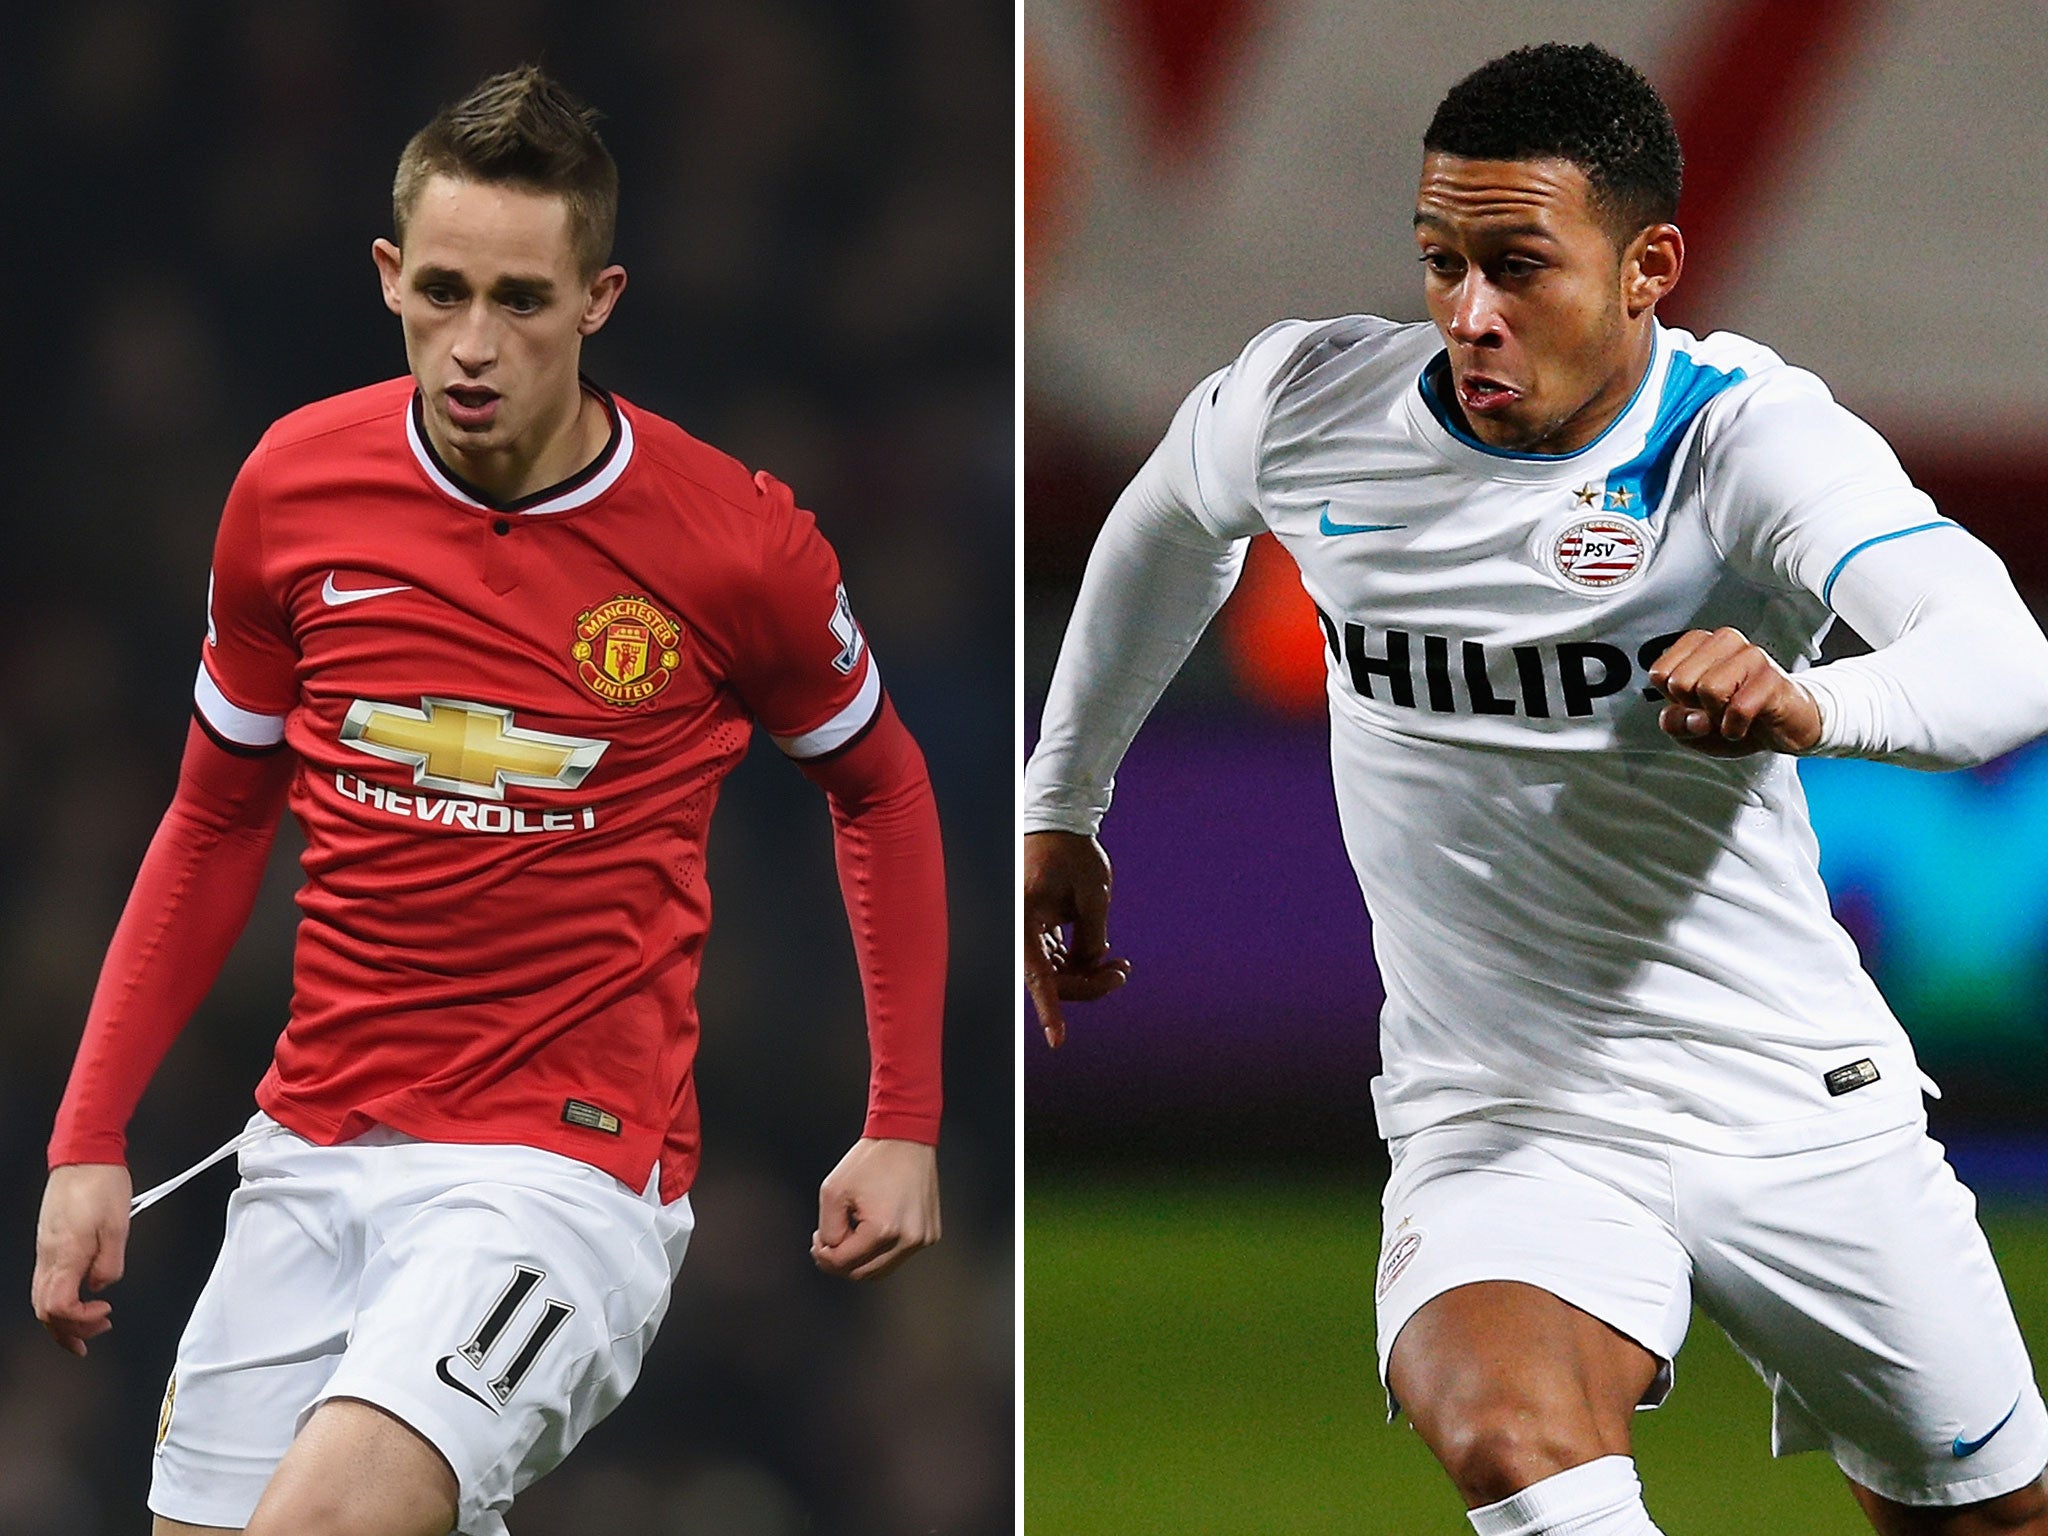 Adnan Januzaj and Memphis Depay could be moved in opposite directions